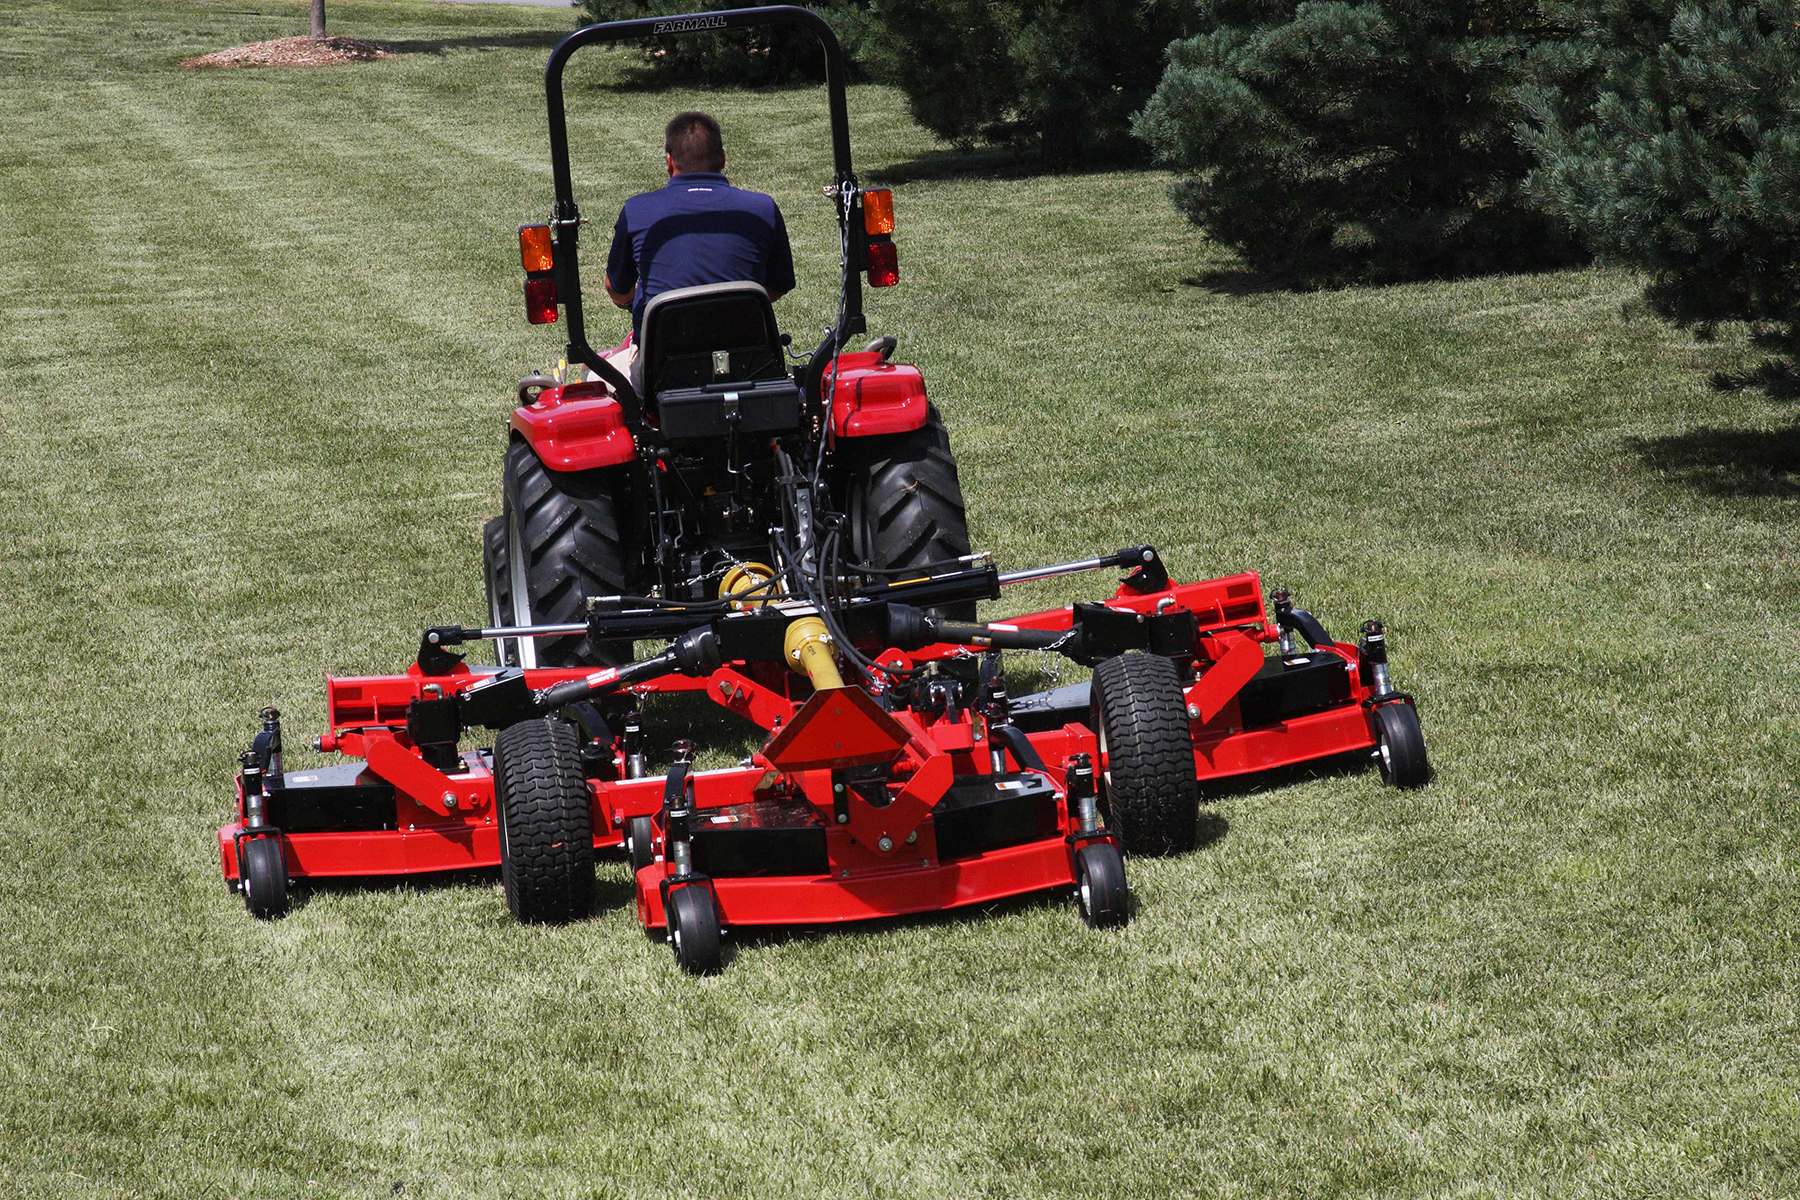 Commercial Lawn Mowers